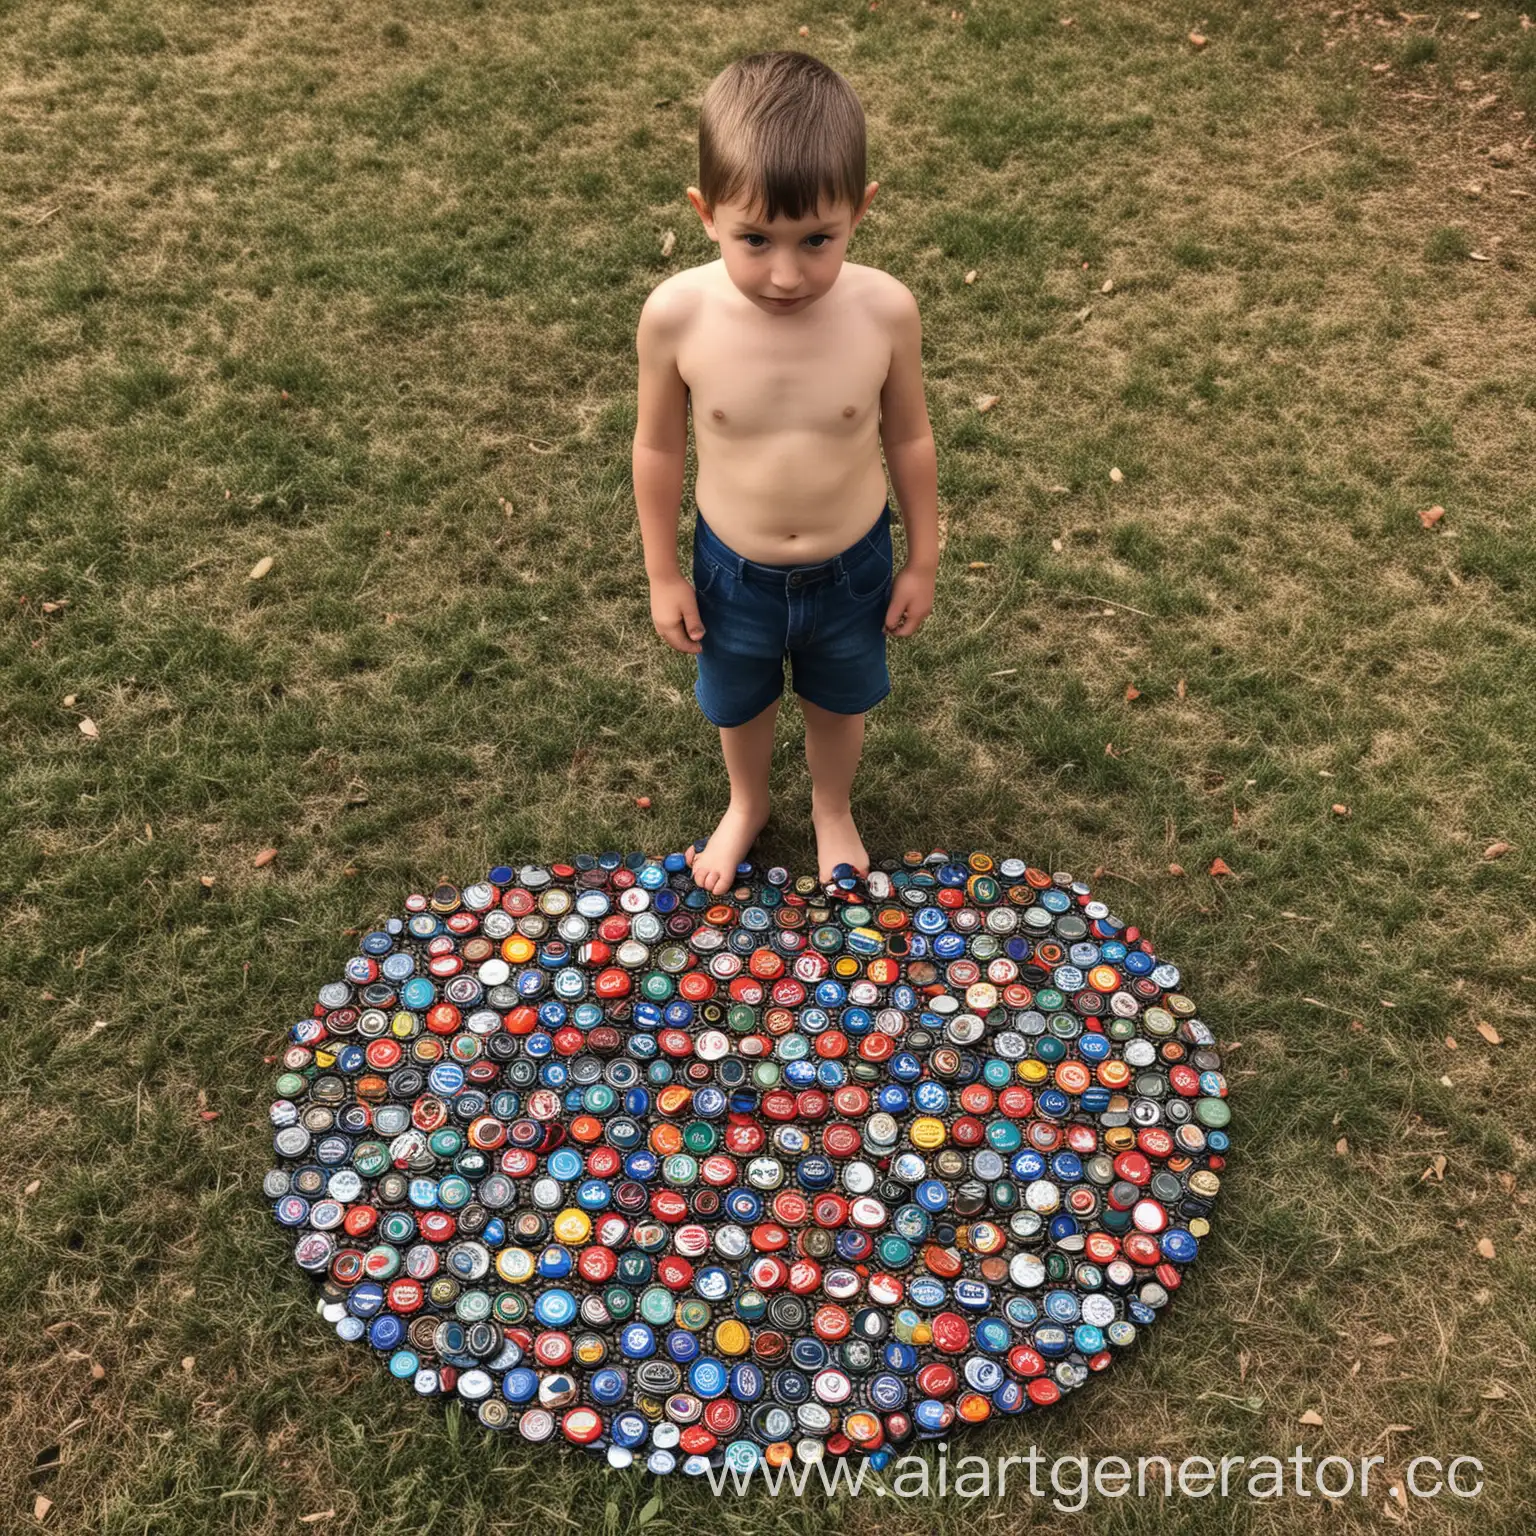 Father-Instructs-Son-to-Balance-on-Half-of-Sharp-Beer-Bottle-Caps